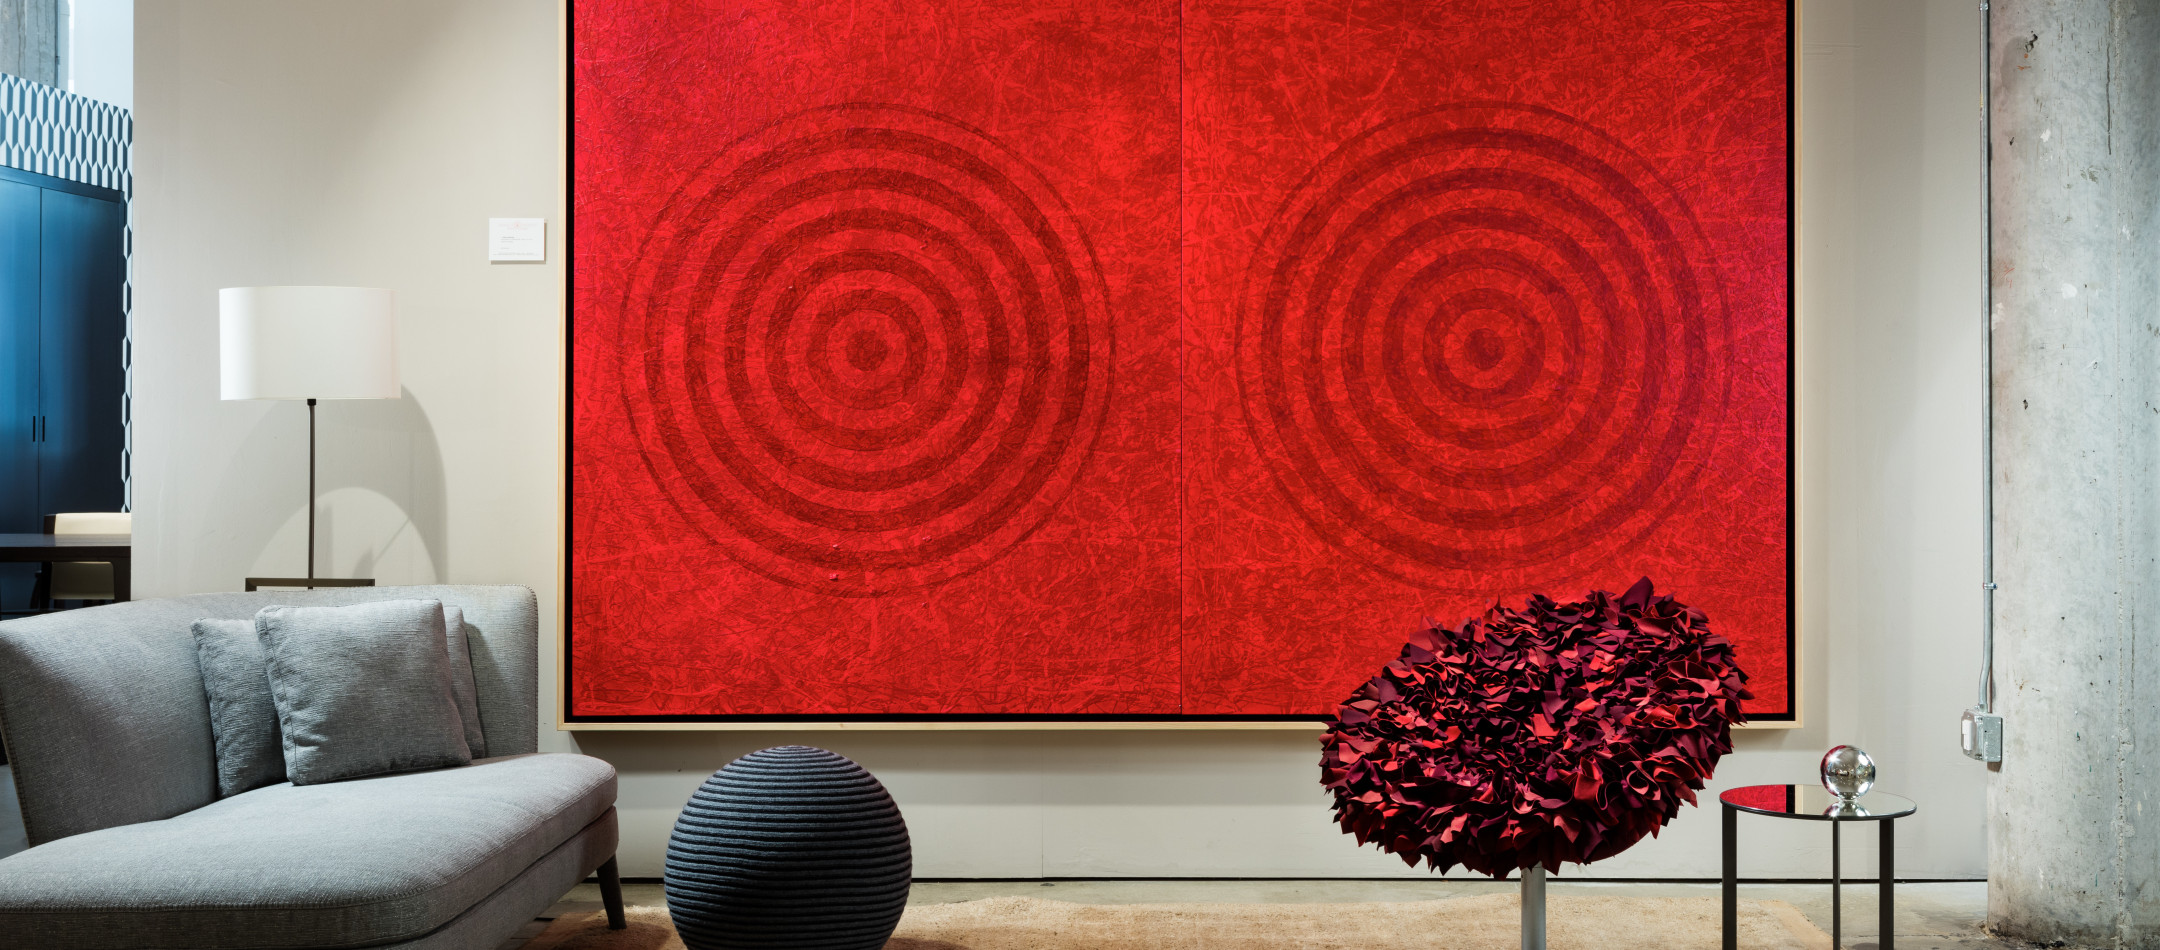 J. Steven Manolis, Extra Large Red Abstract Wall art, Installation of Redworld double concentric painting at Max Alto